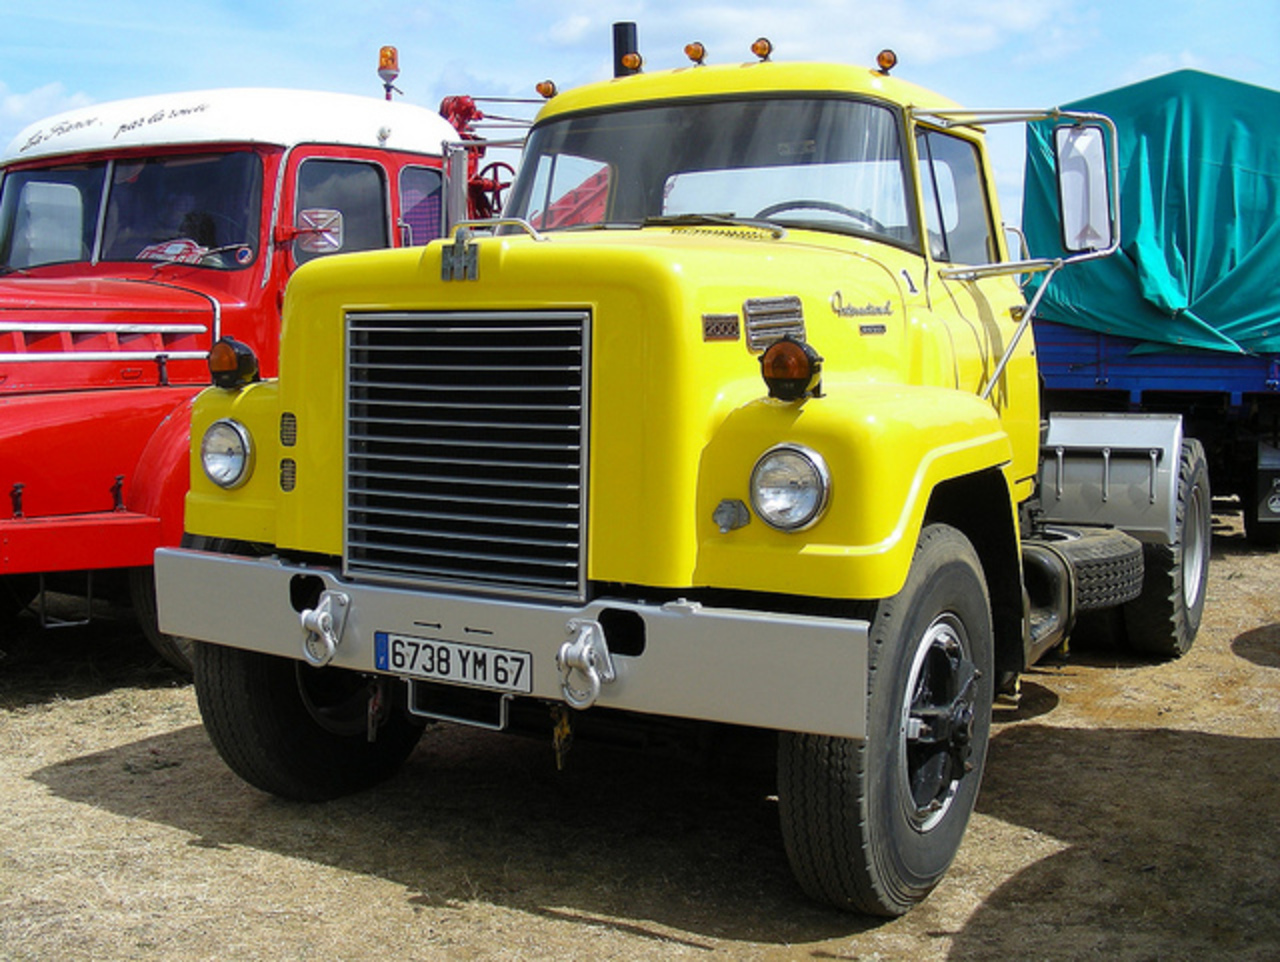 Flickr: The American Trucks Abroad Pool